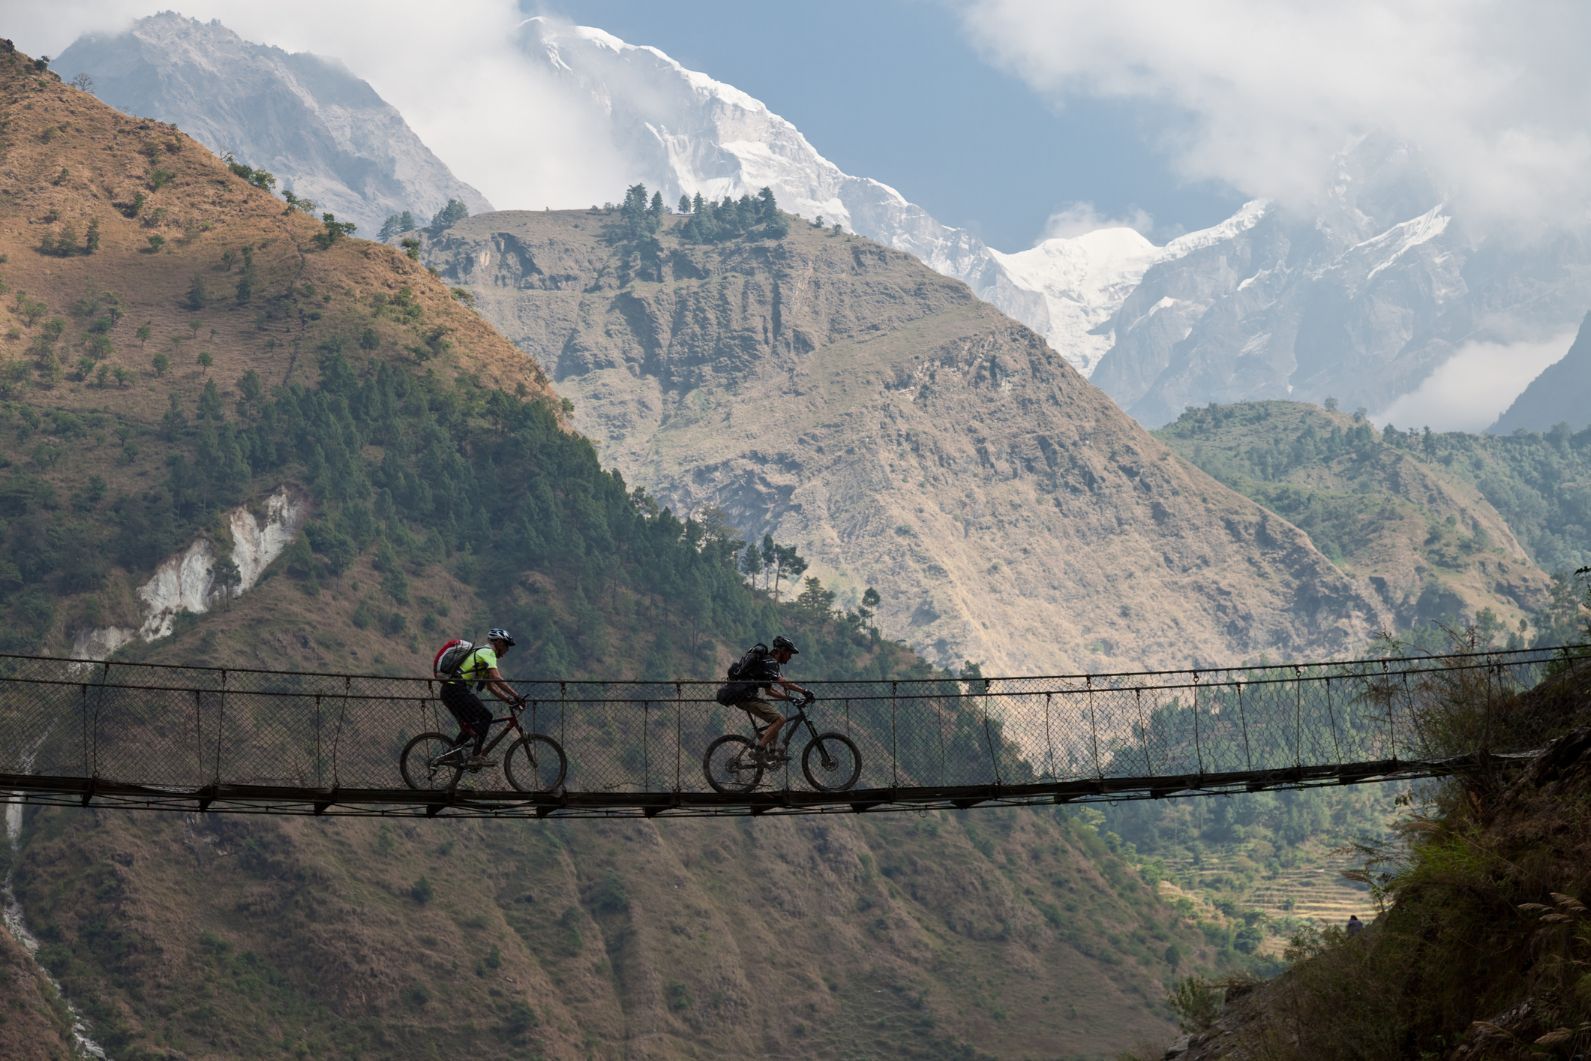 Riding over the famous Kali Gandaki suspension bridge in the Himalayas of Nepal. Photo: Getty